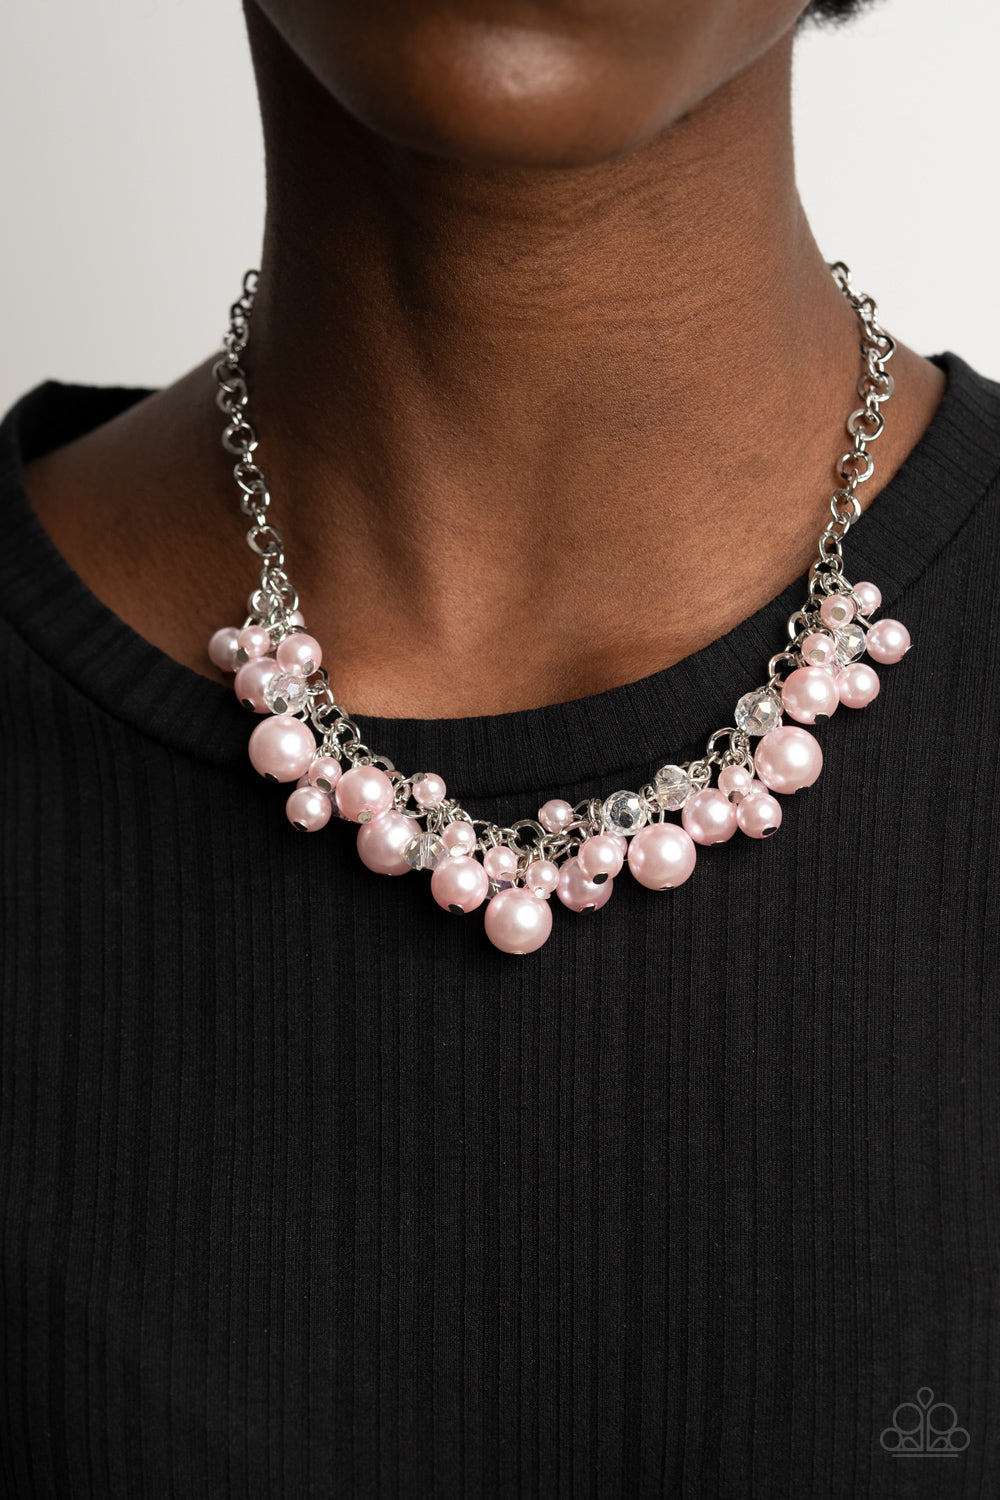 Paparazzi Positively PEARL-escent - Pink short necklace PRE ORDER - $5 Jewelry with Ashley Swint